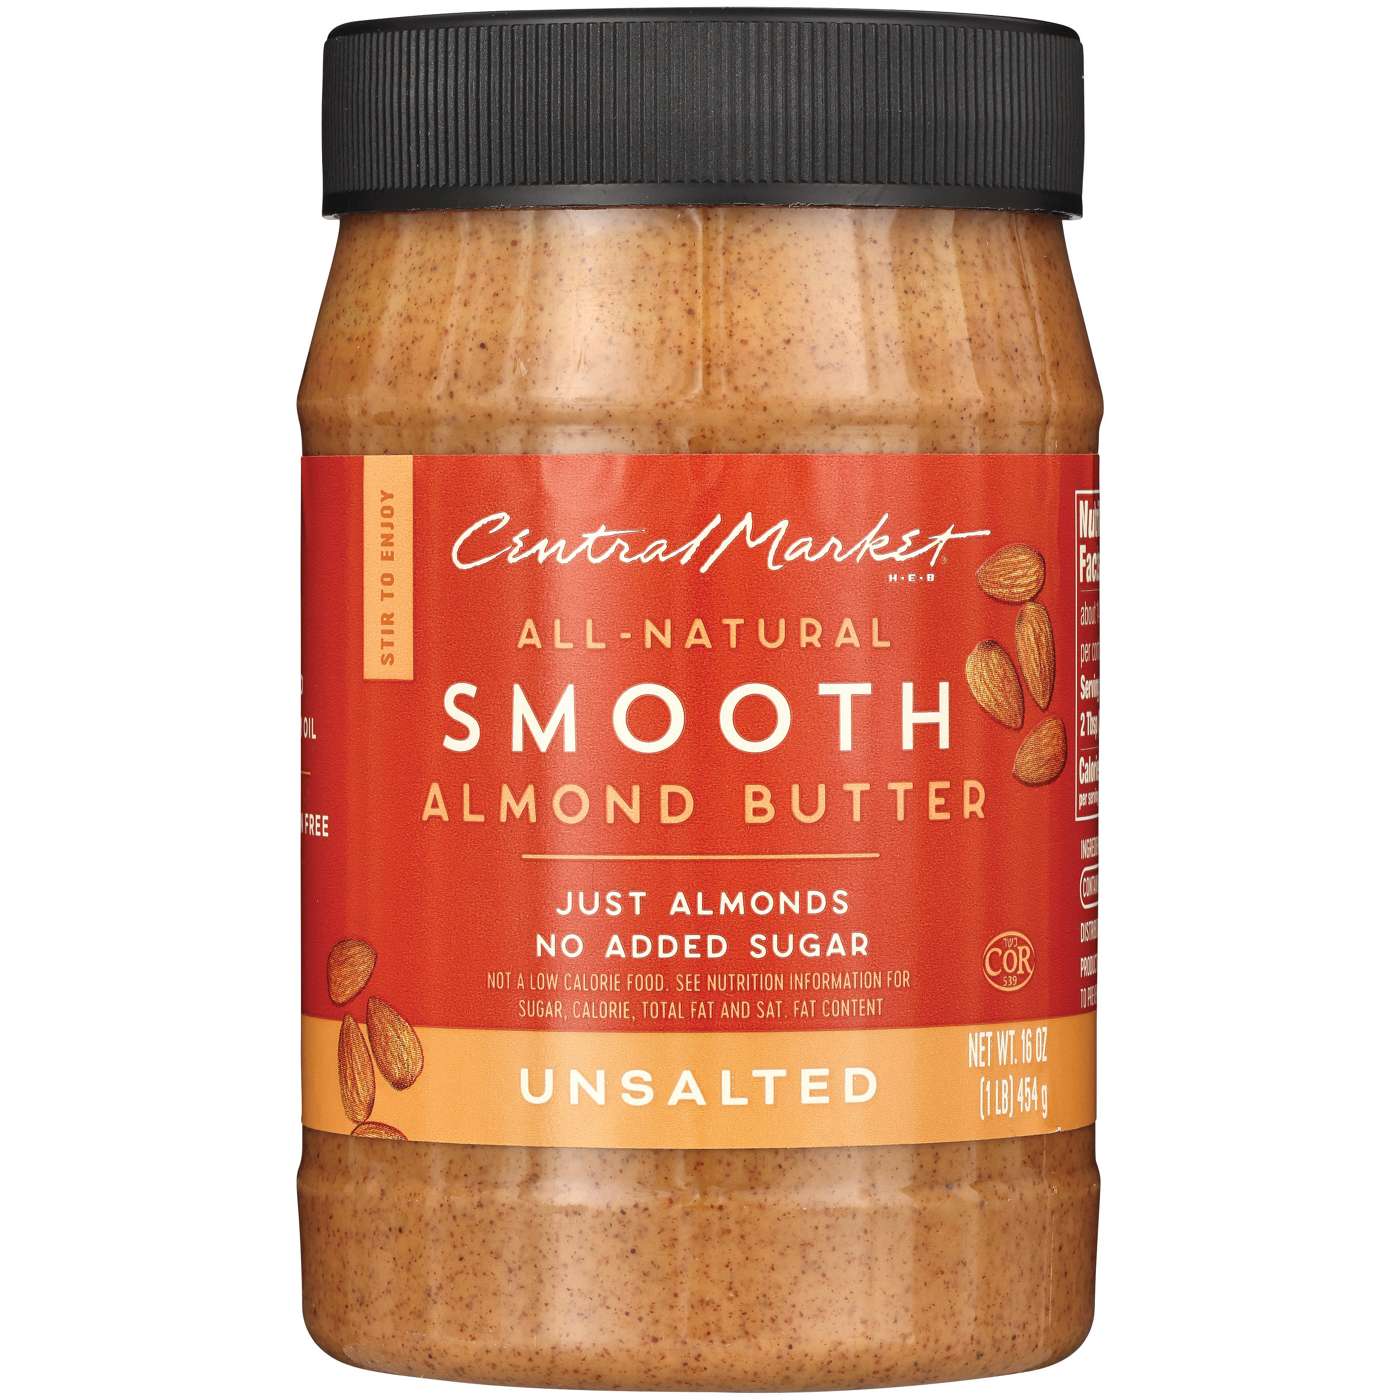 Central Market All-Natural Smooth Almond Butter – Unsalted; image 1 of 2